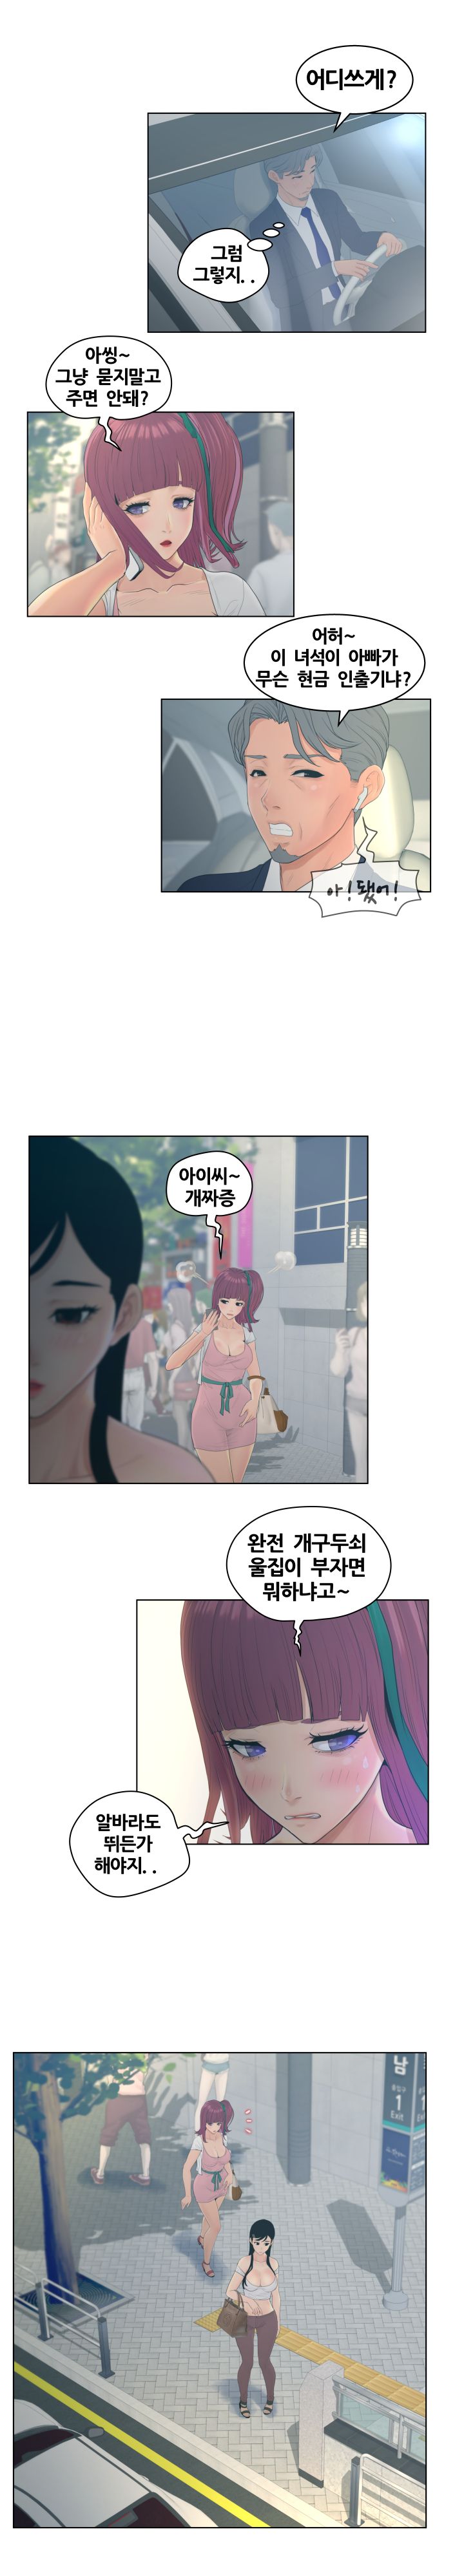 Share Girls Raw - Chapter 9 Page 4